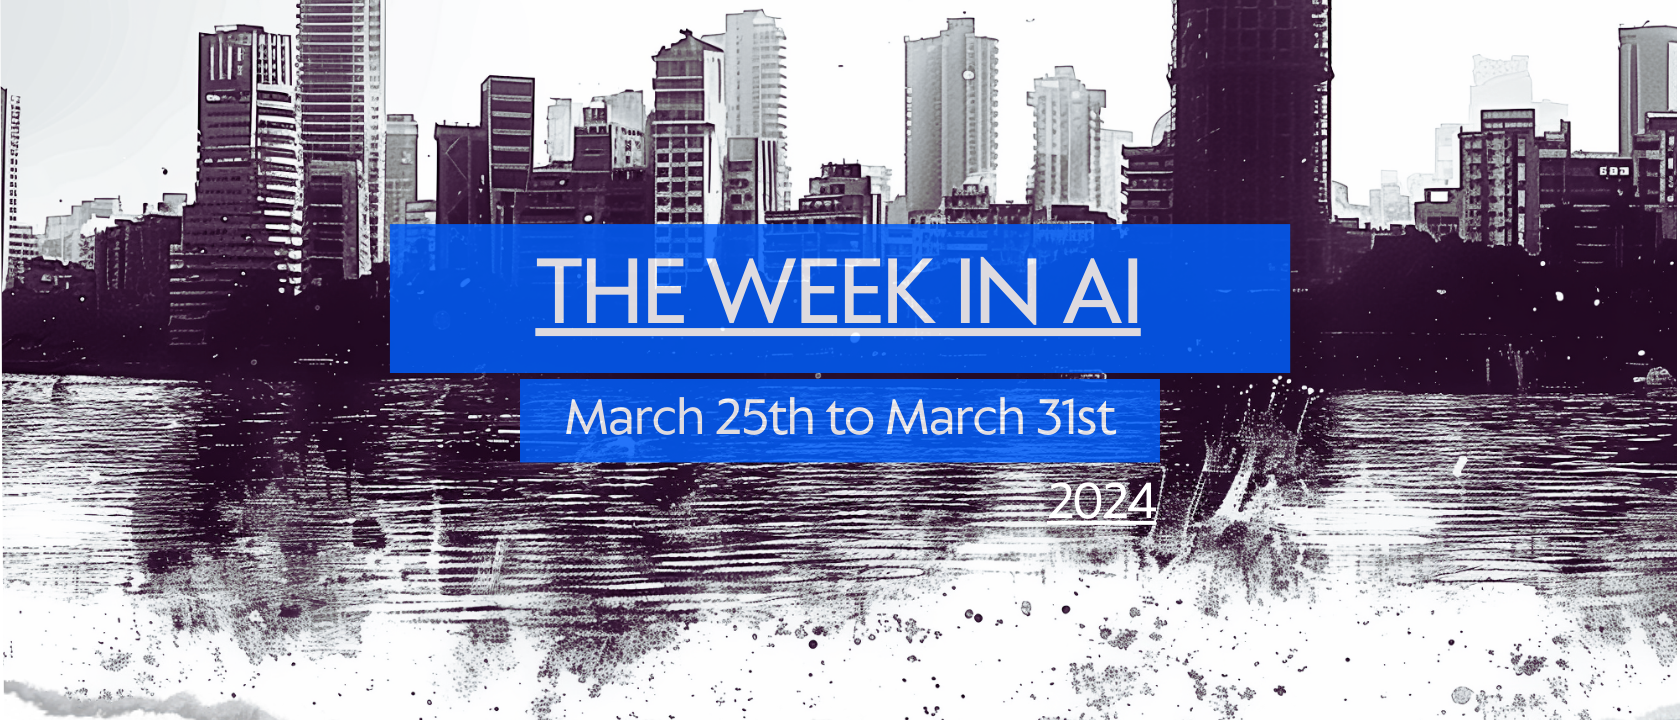 The week in AI – 31st March ’24 – a quick summary